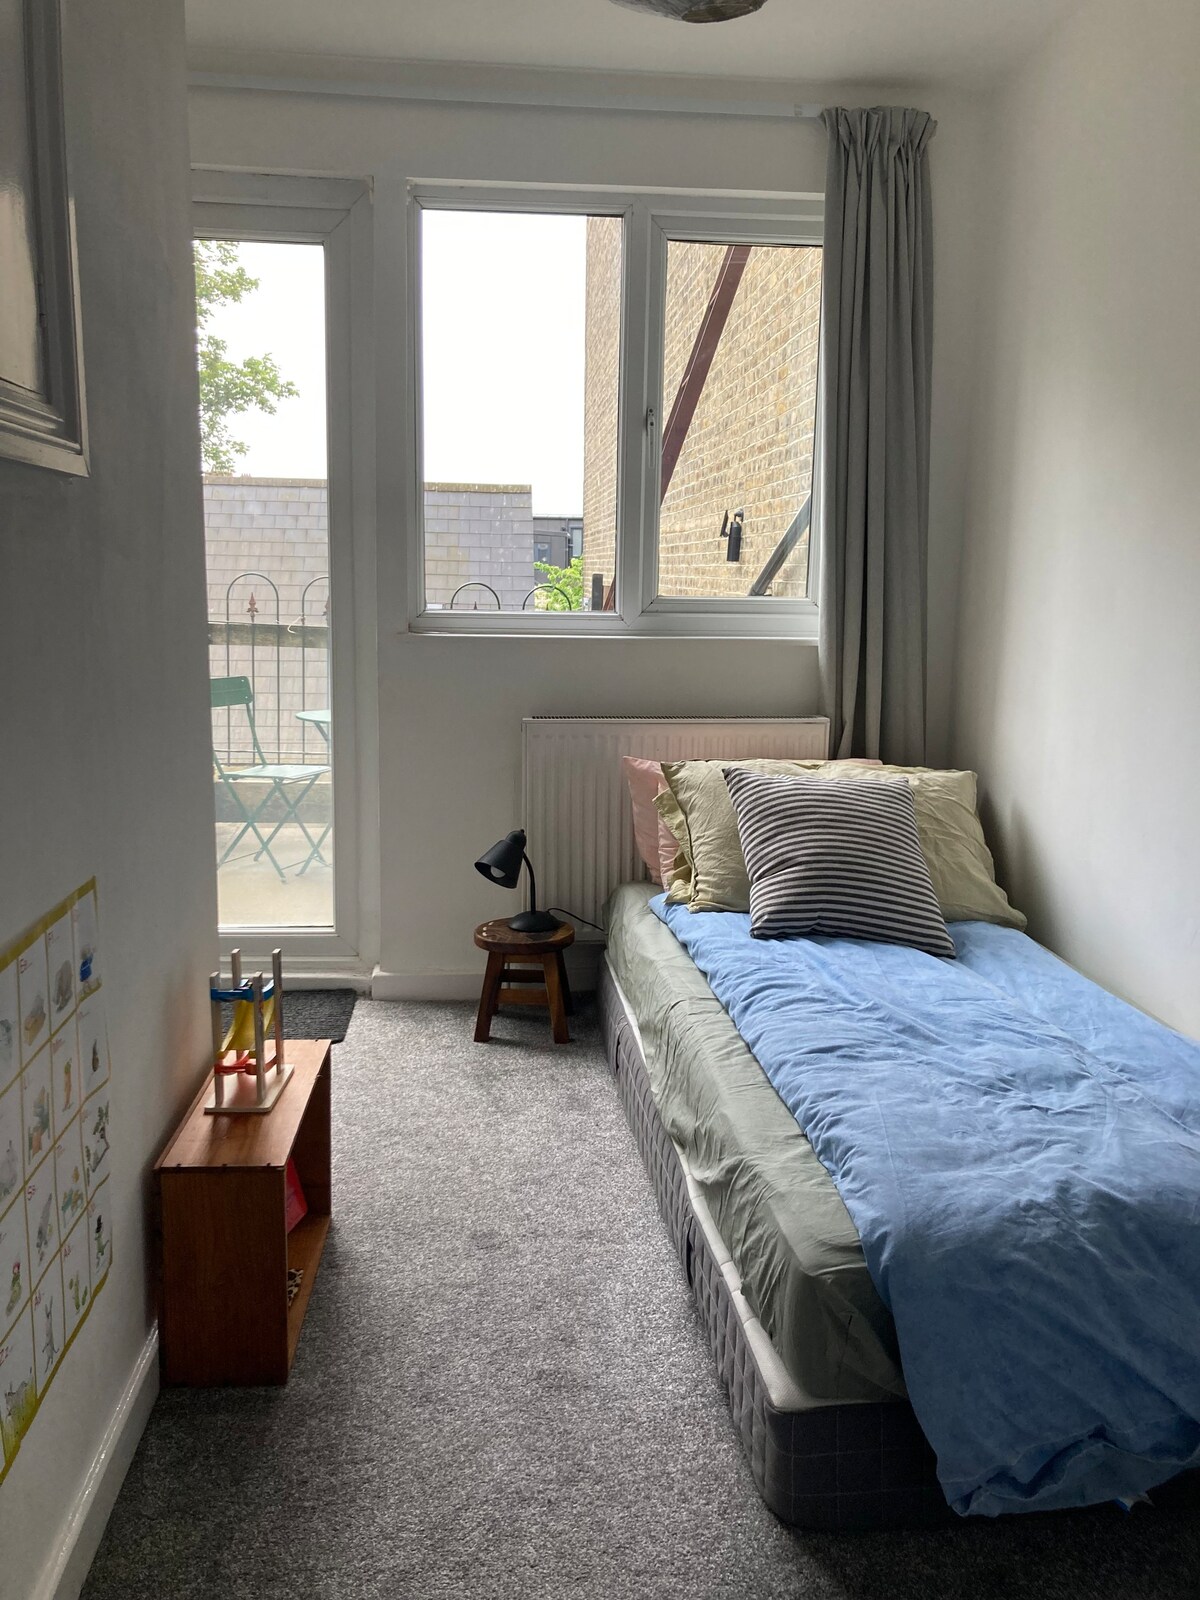 2 bed. Free parking. 1 min from tube. Roof terrace